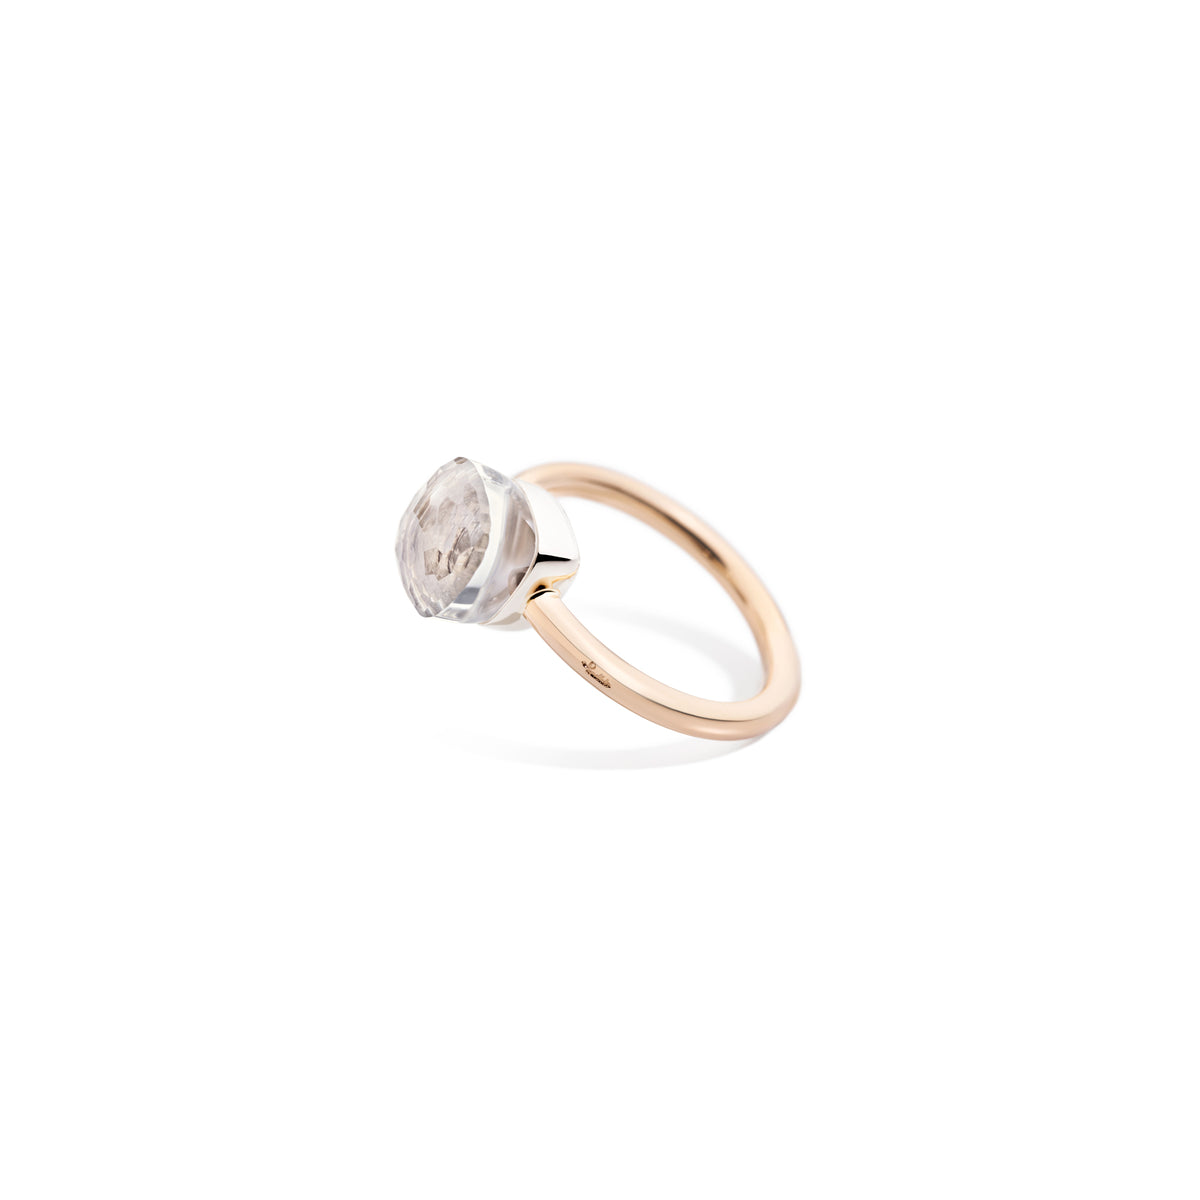 Nudo Petit Ring in 18k Rose Gold and White Gold with White Topaz - Orsini Jewellers NZ